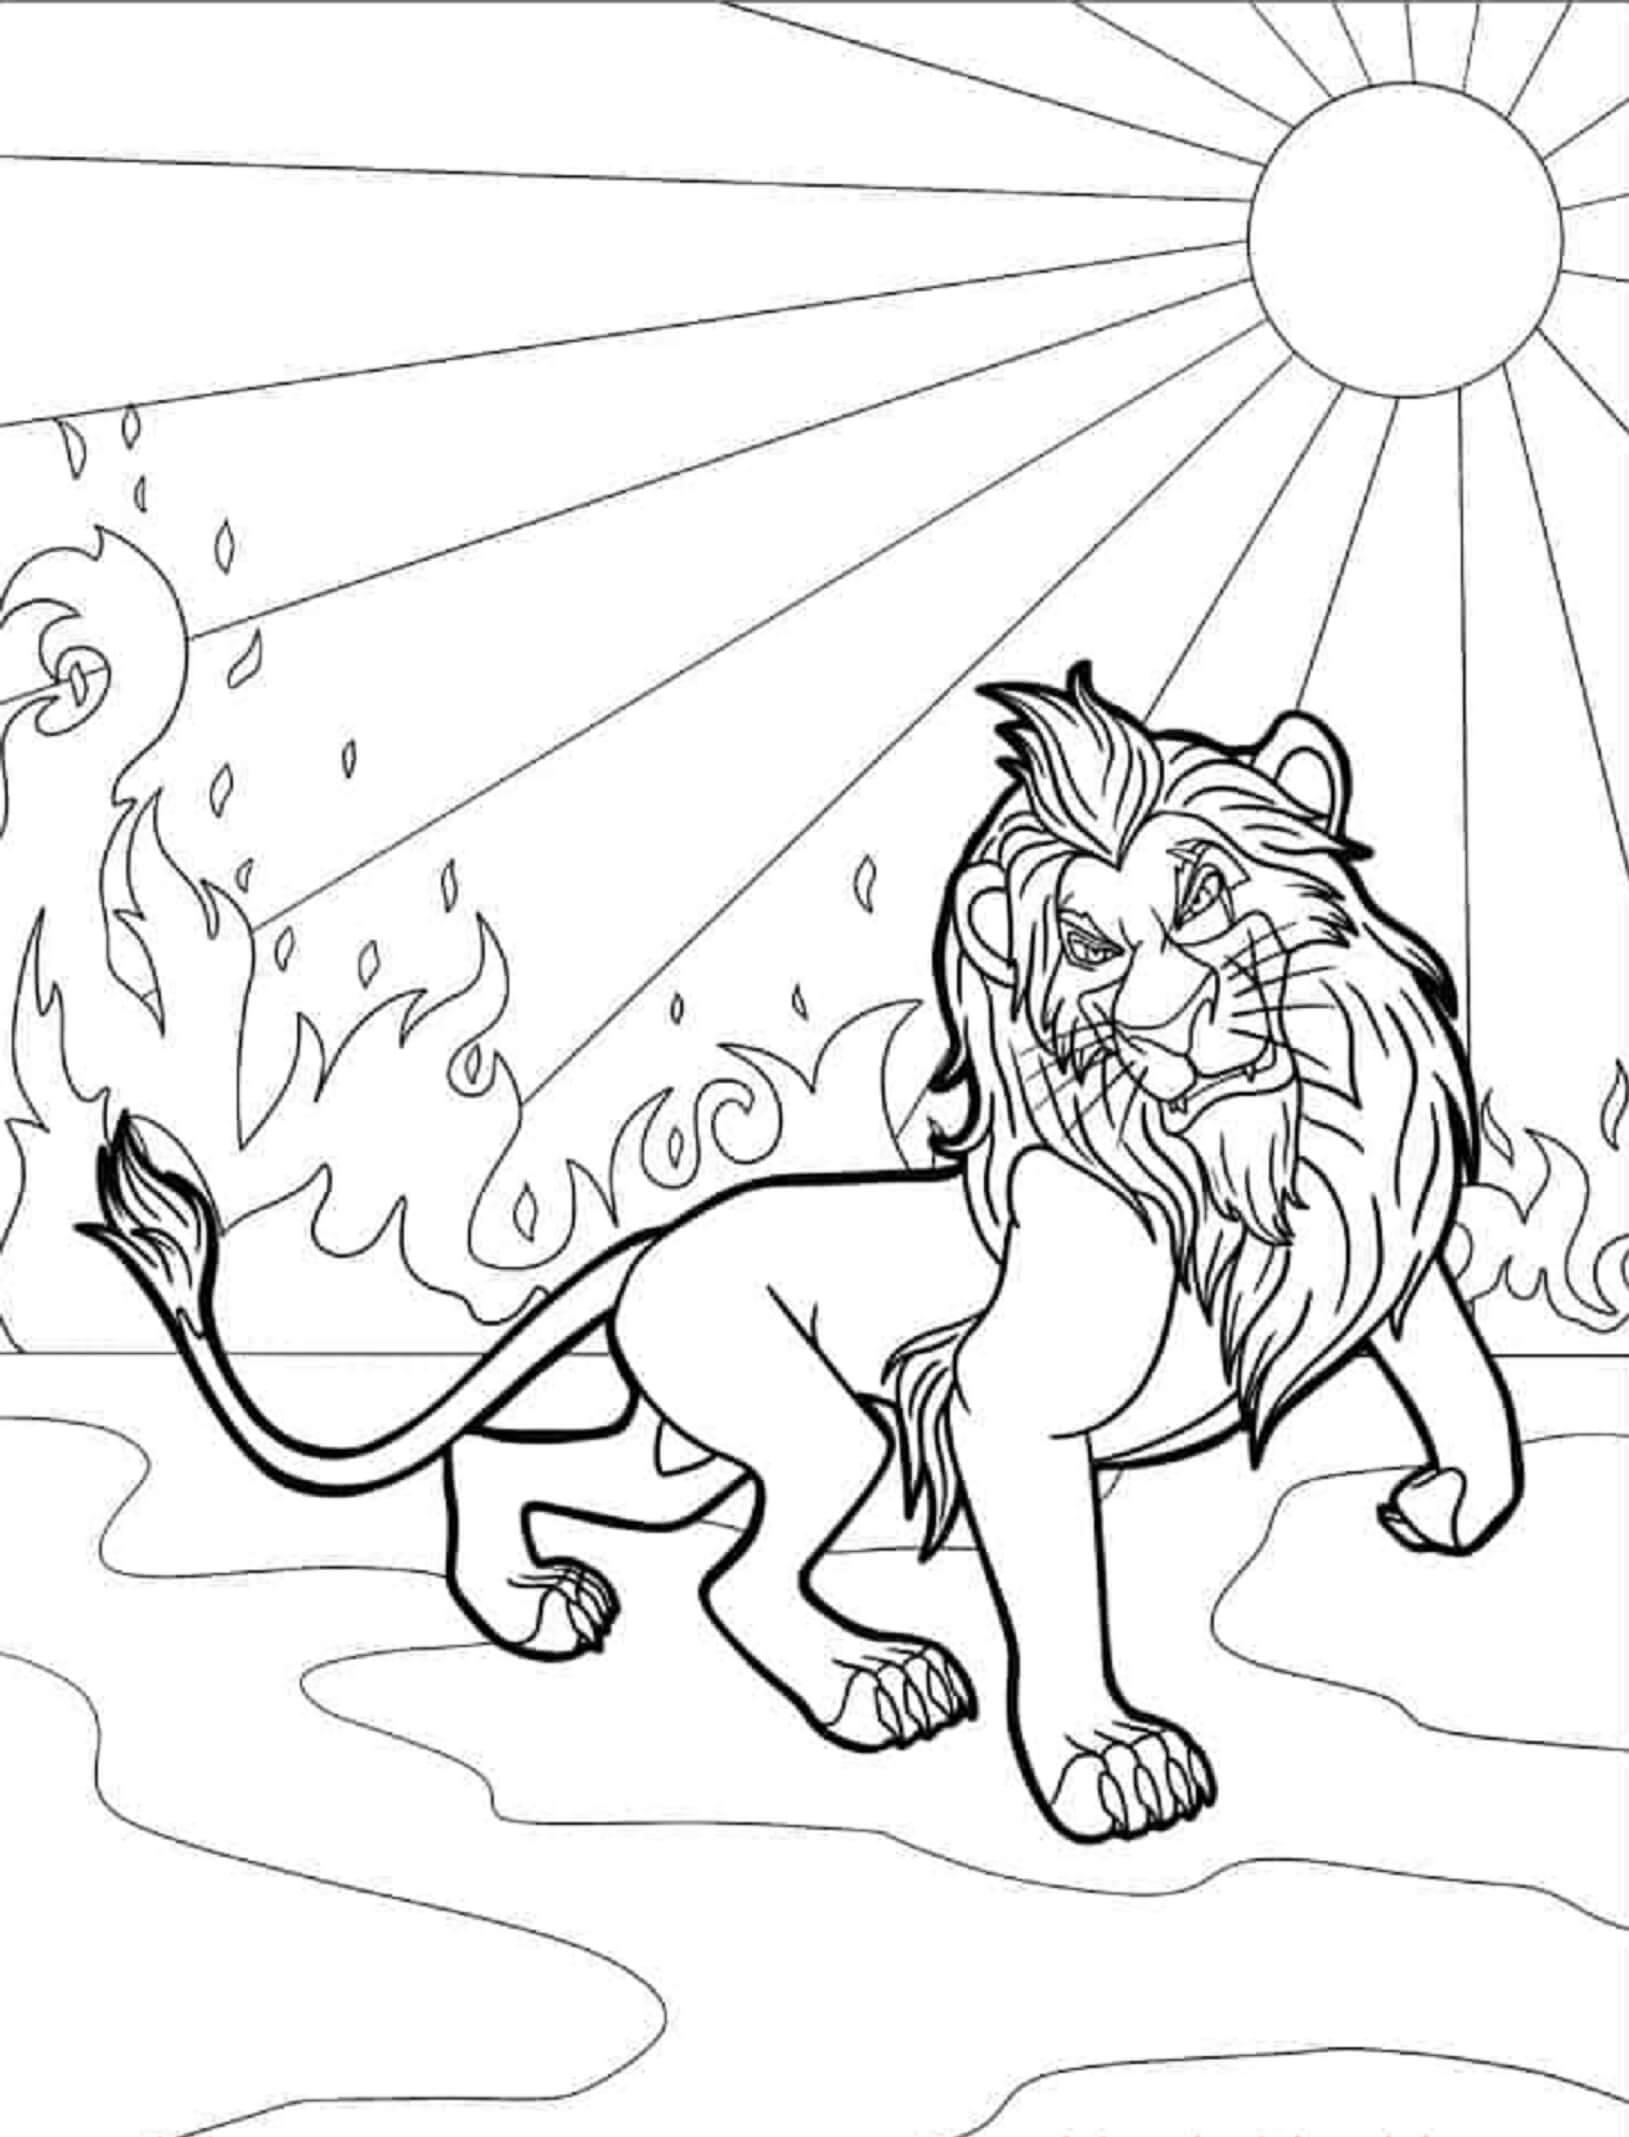 Angry Scar coloring page - Download, Print or Color Online for Free